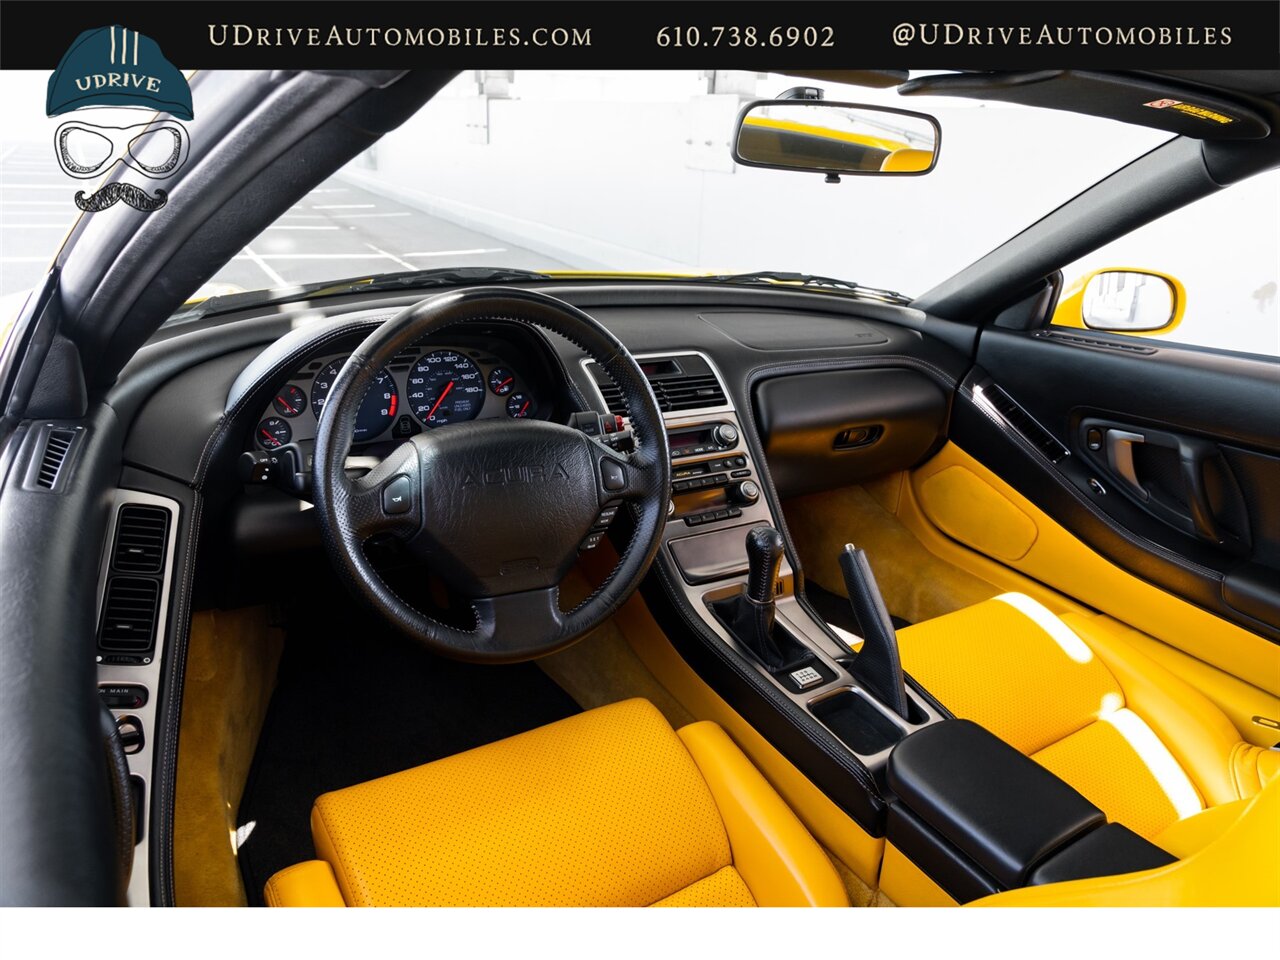 2003 Acura NSX NSX-T  Spa Yellow over Yellow Lthr 1 of 13 Produced - Photo 6 - West Chester, PA 19382